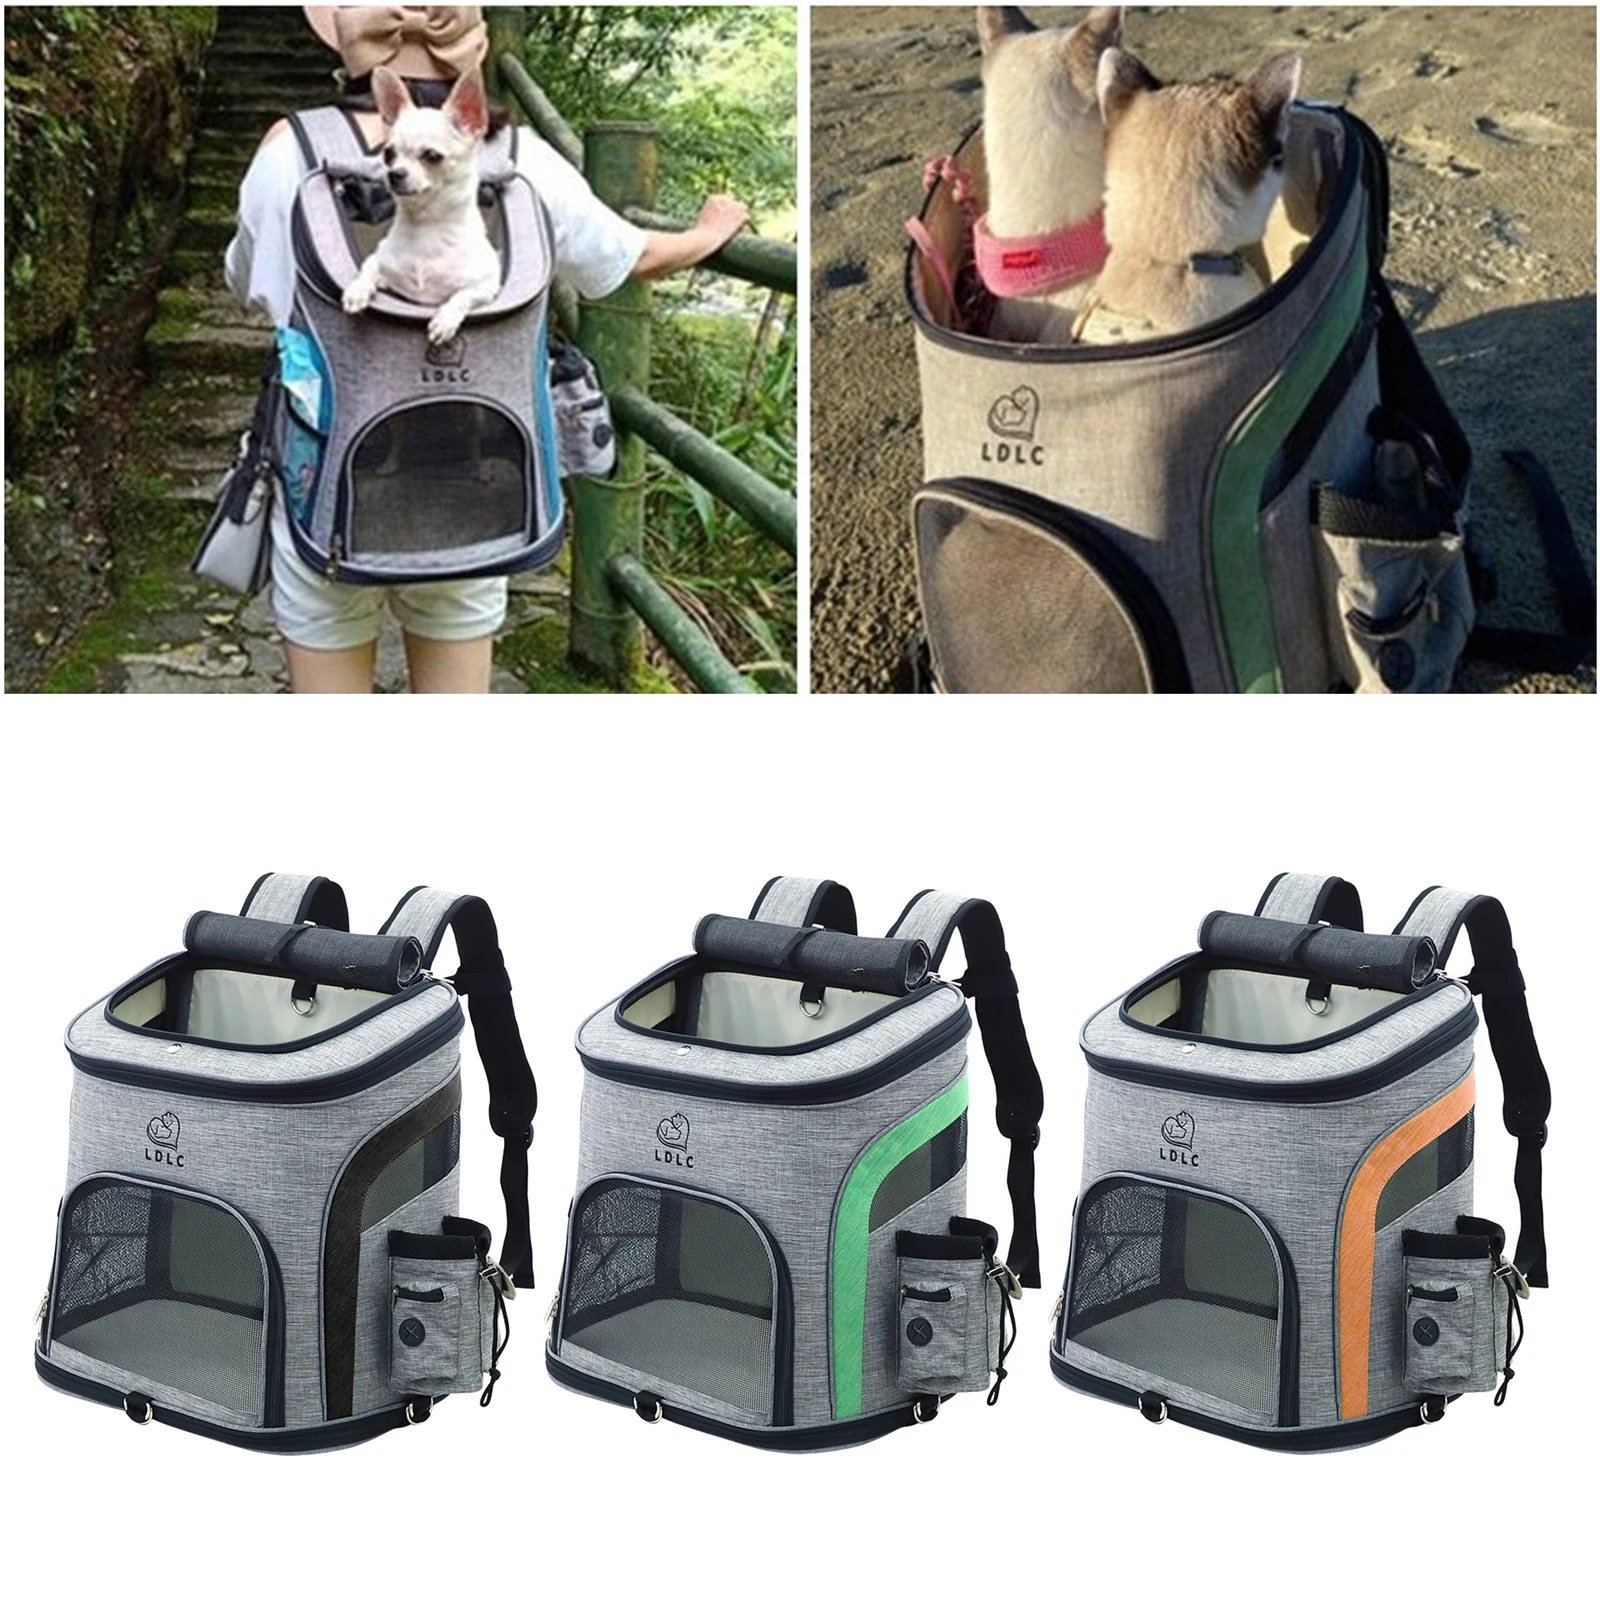 Pet Backpack Carrier for Small Cats Dogs, Breathable Mesh Carry Bag Collapsible